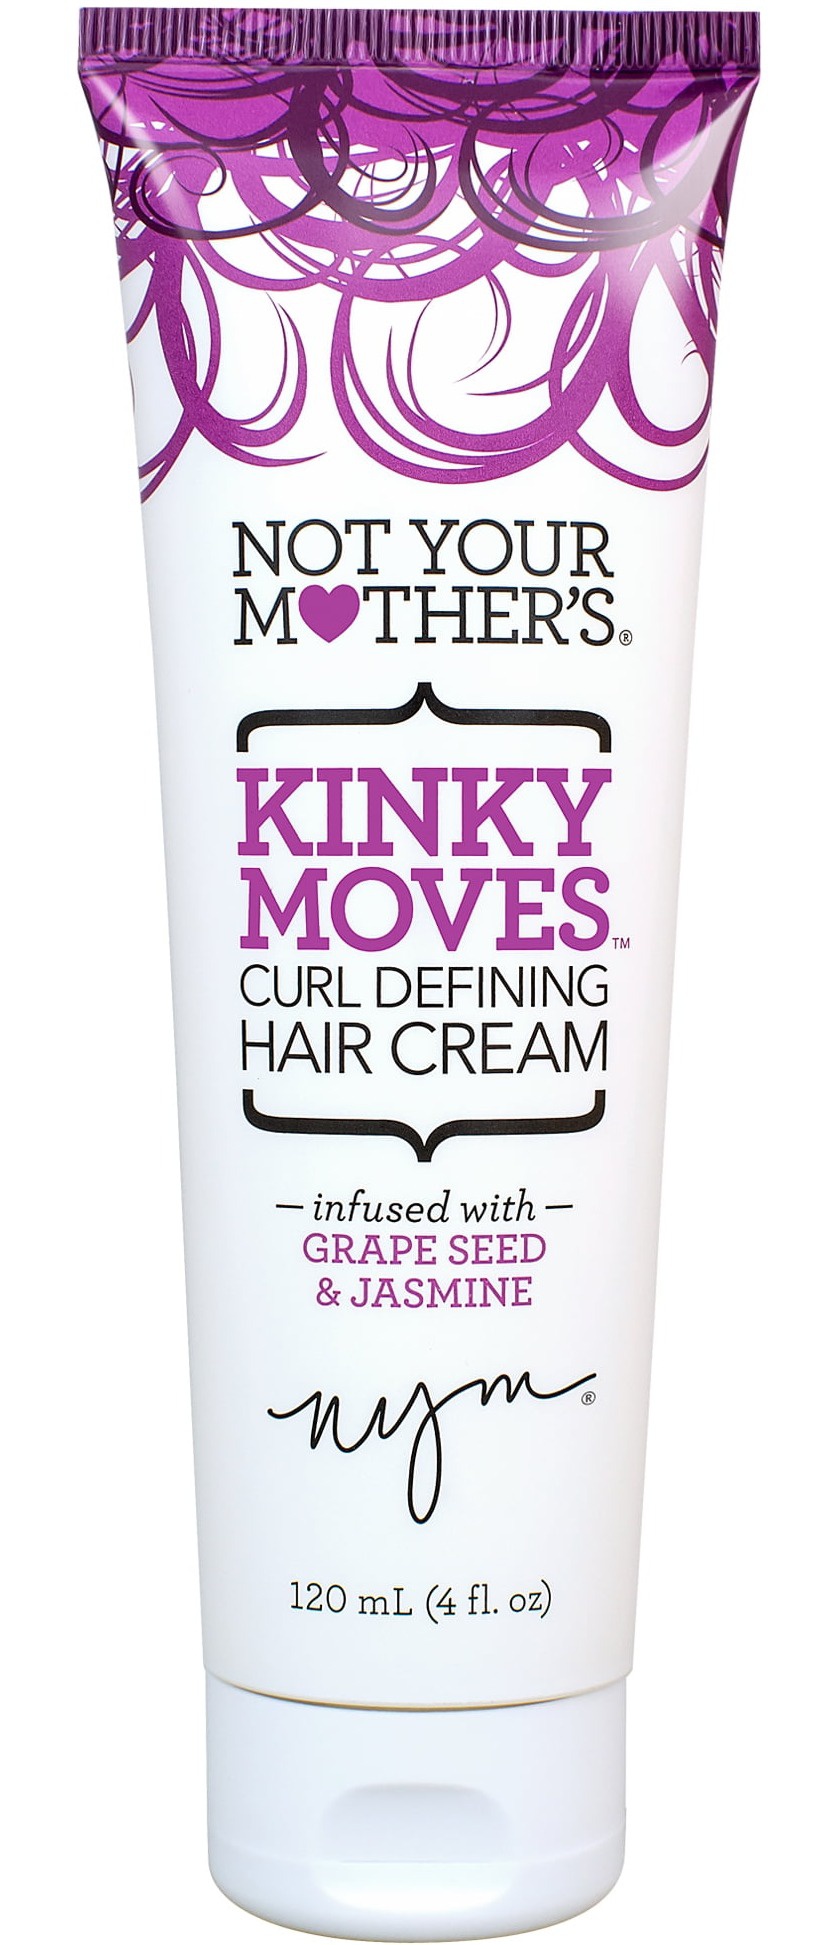 not your mother's Kinky Moves Curl Defining Hair Cream